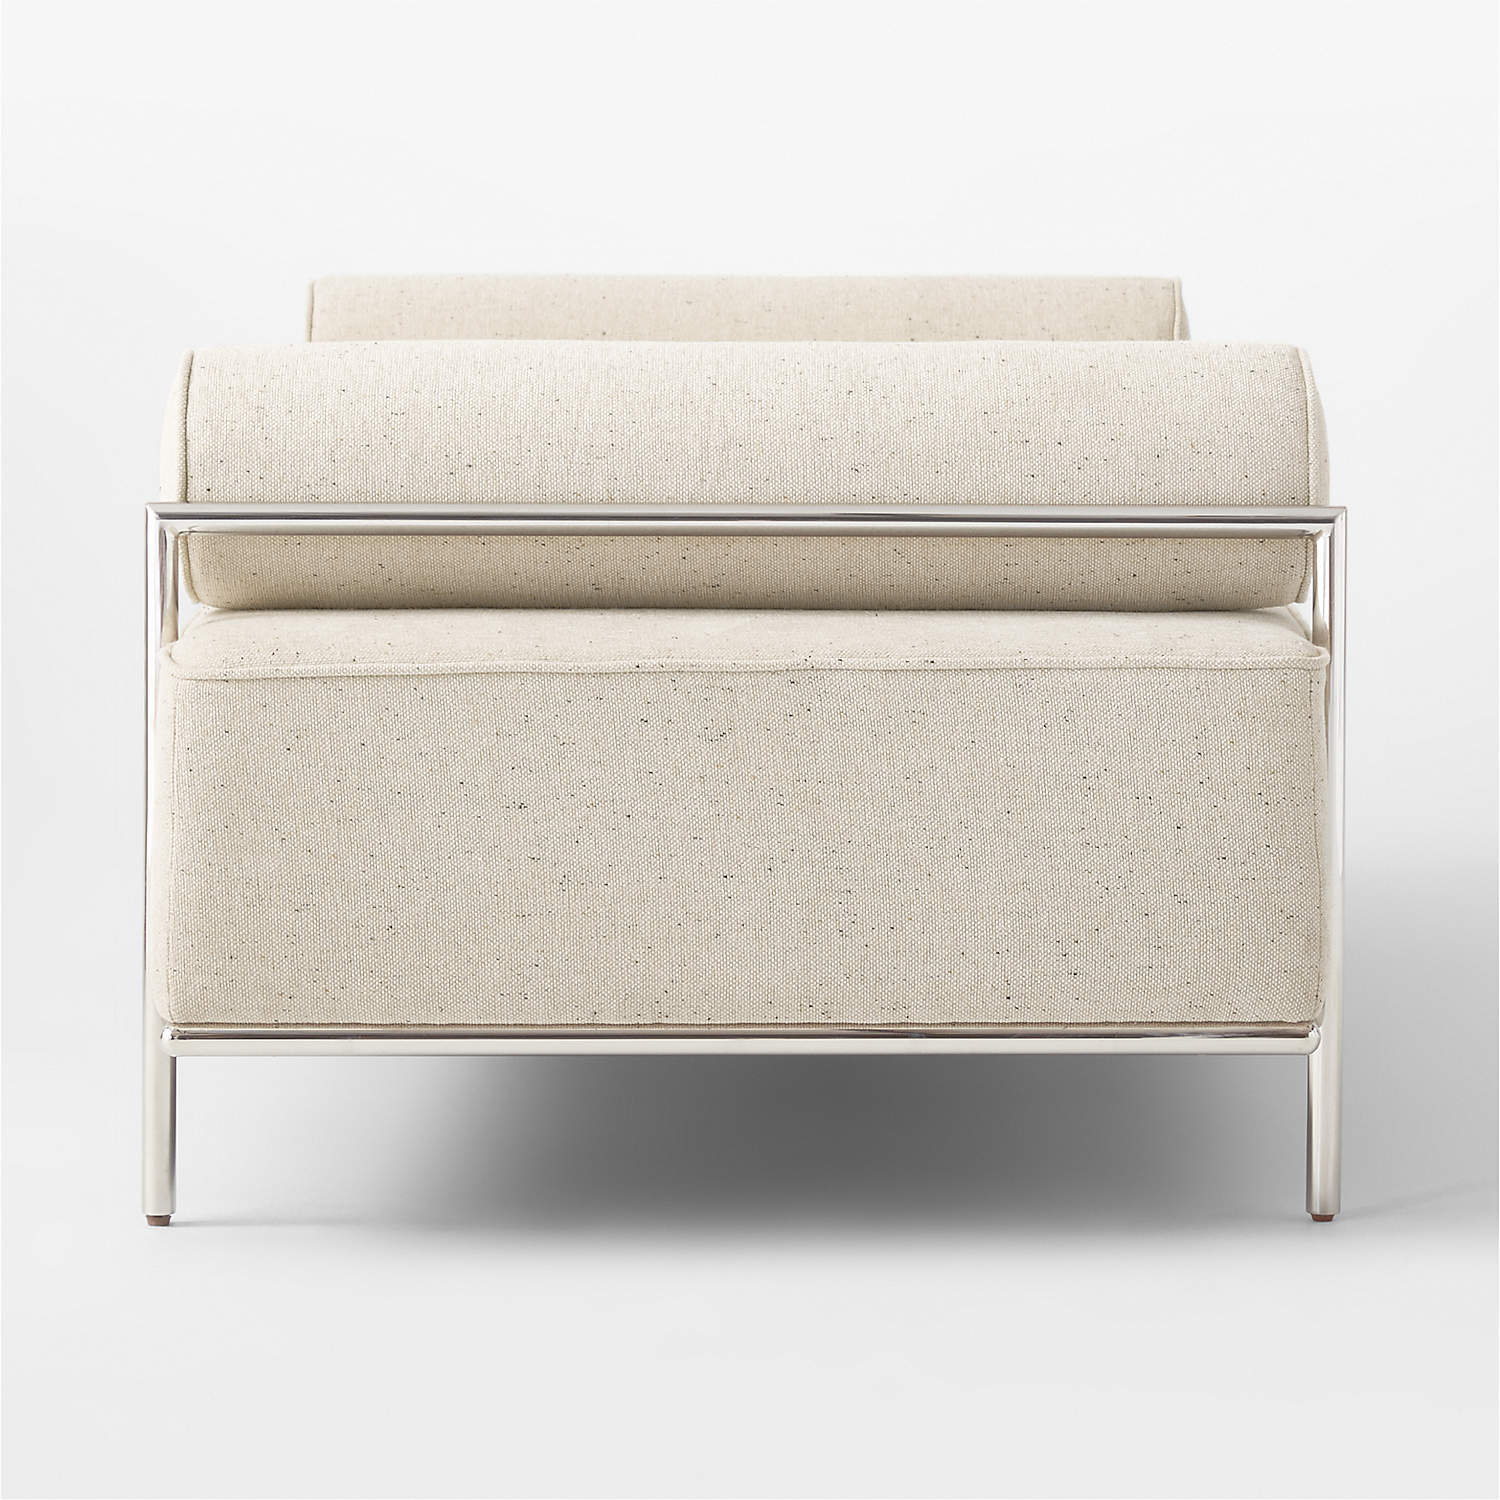 Melatee End of Bed Bench - INTERIORTONIC